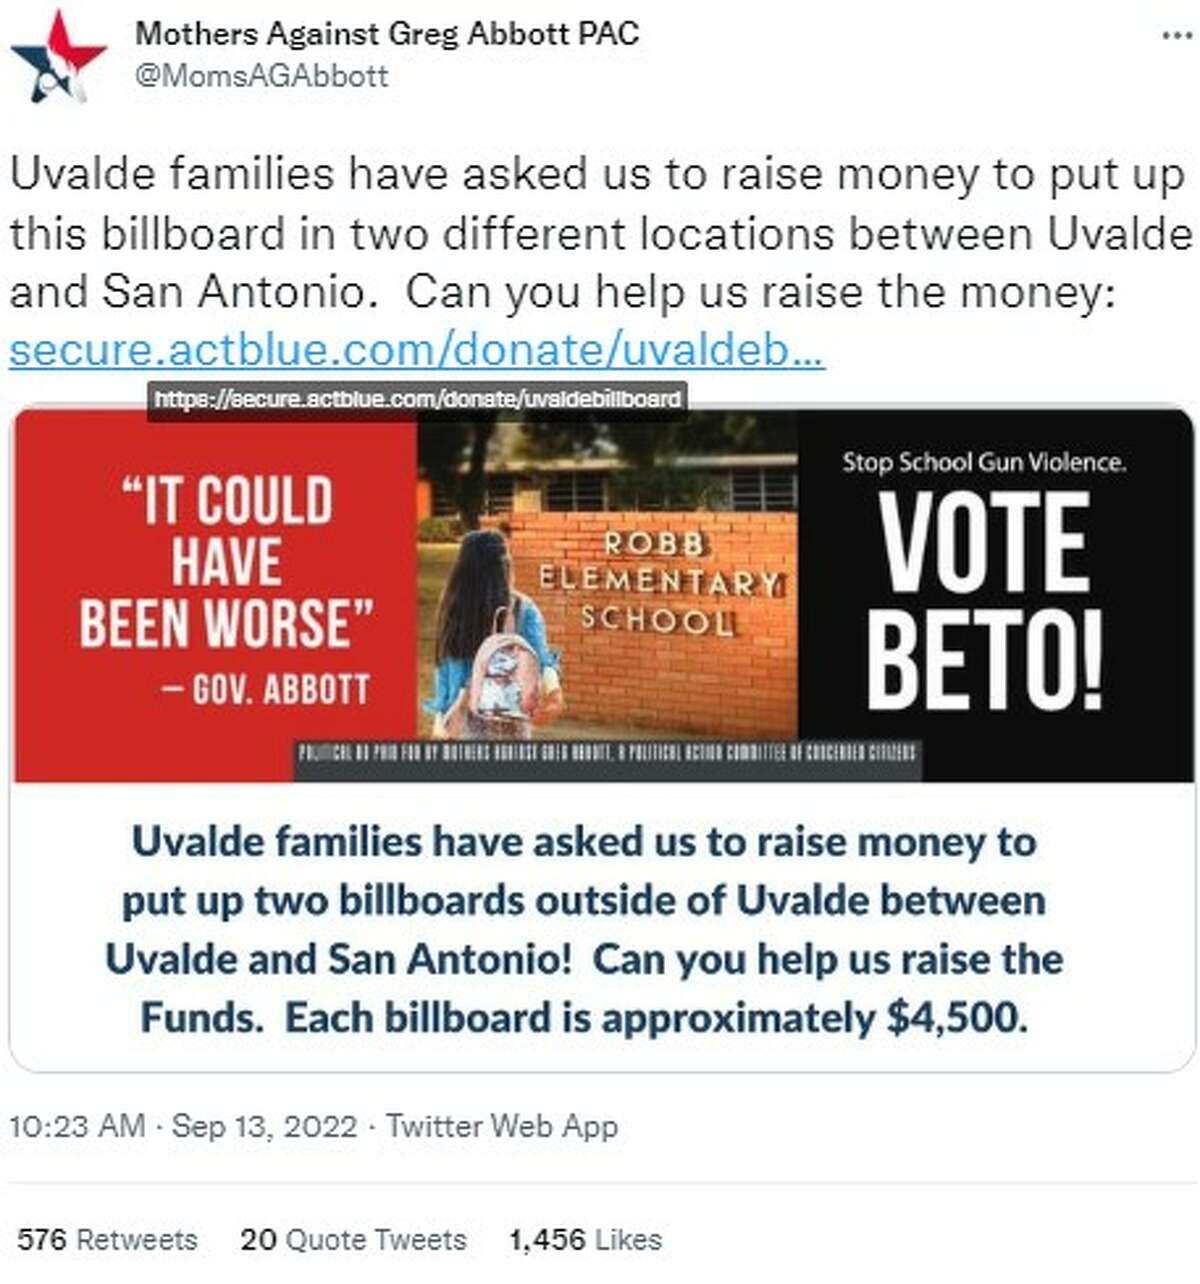 Mothers Against Greg Abbott PAC tweeted this message.